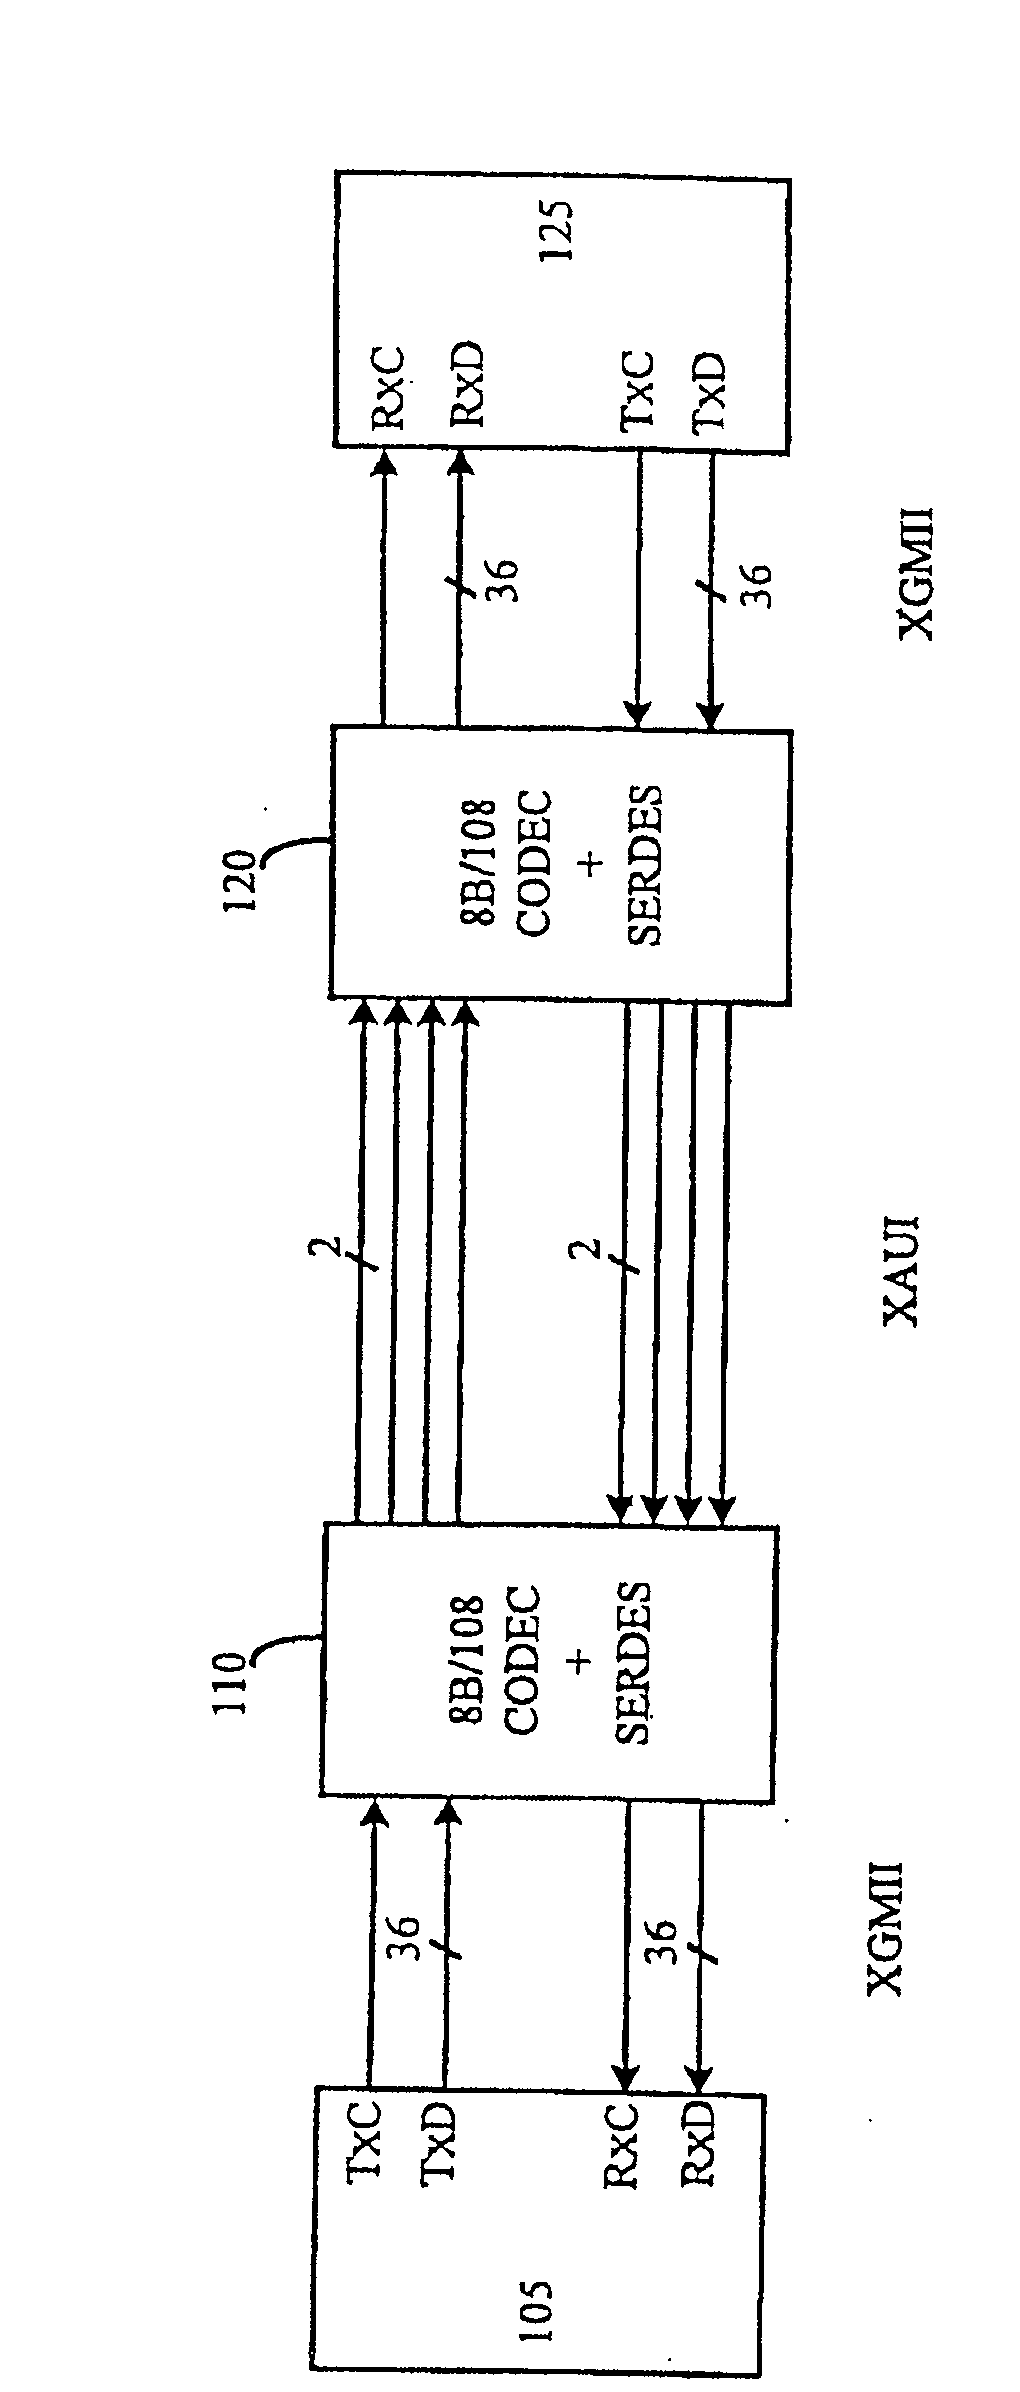 Protocol independent transmission using a 10 gigabit attachment unit interface